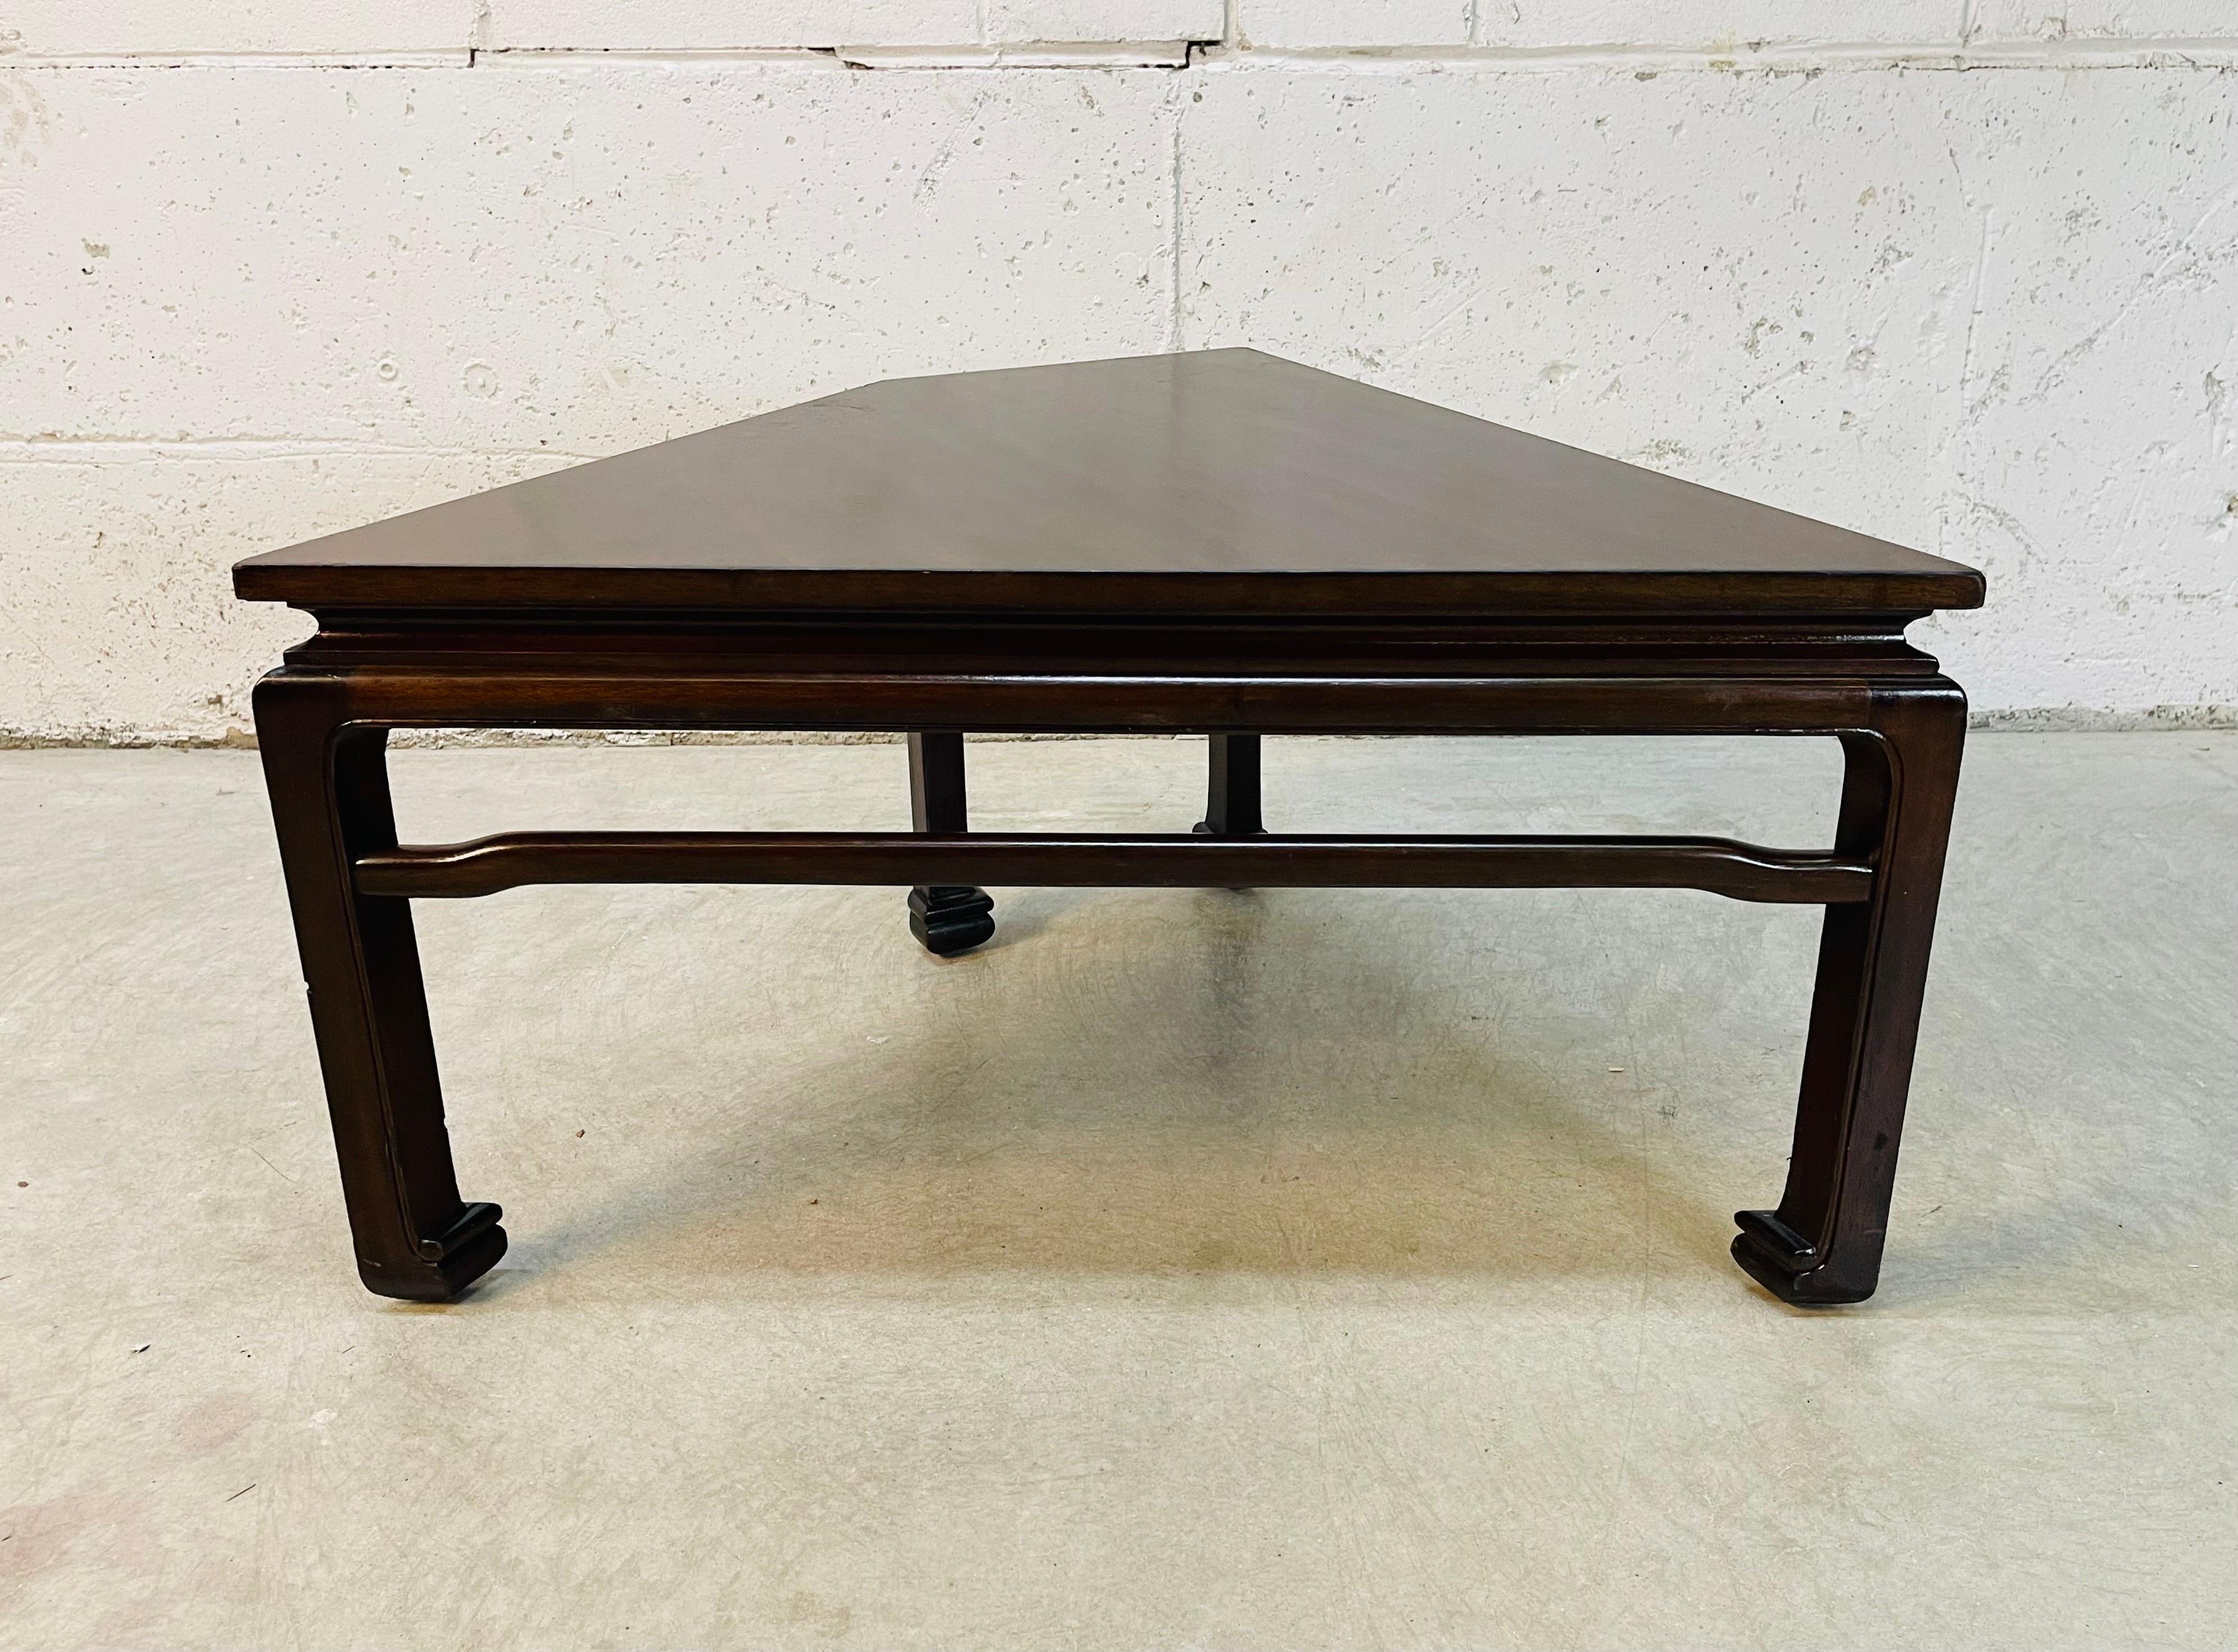 Vintage 1960s Asian style solid mahogany wood corner table. Legs have the Asian style and the smallest corner section of the table is 11.5”W. Light wear from use. No marks.